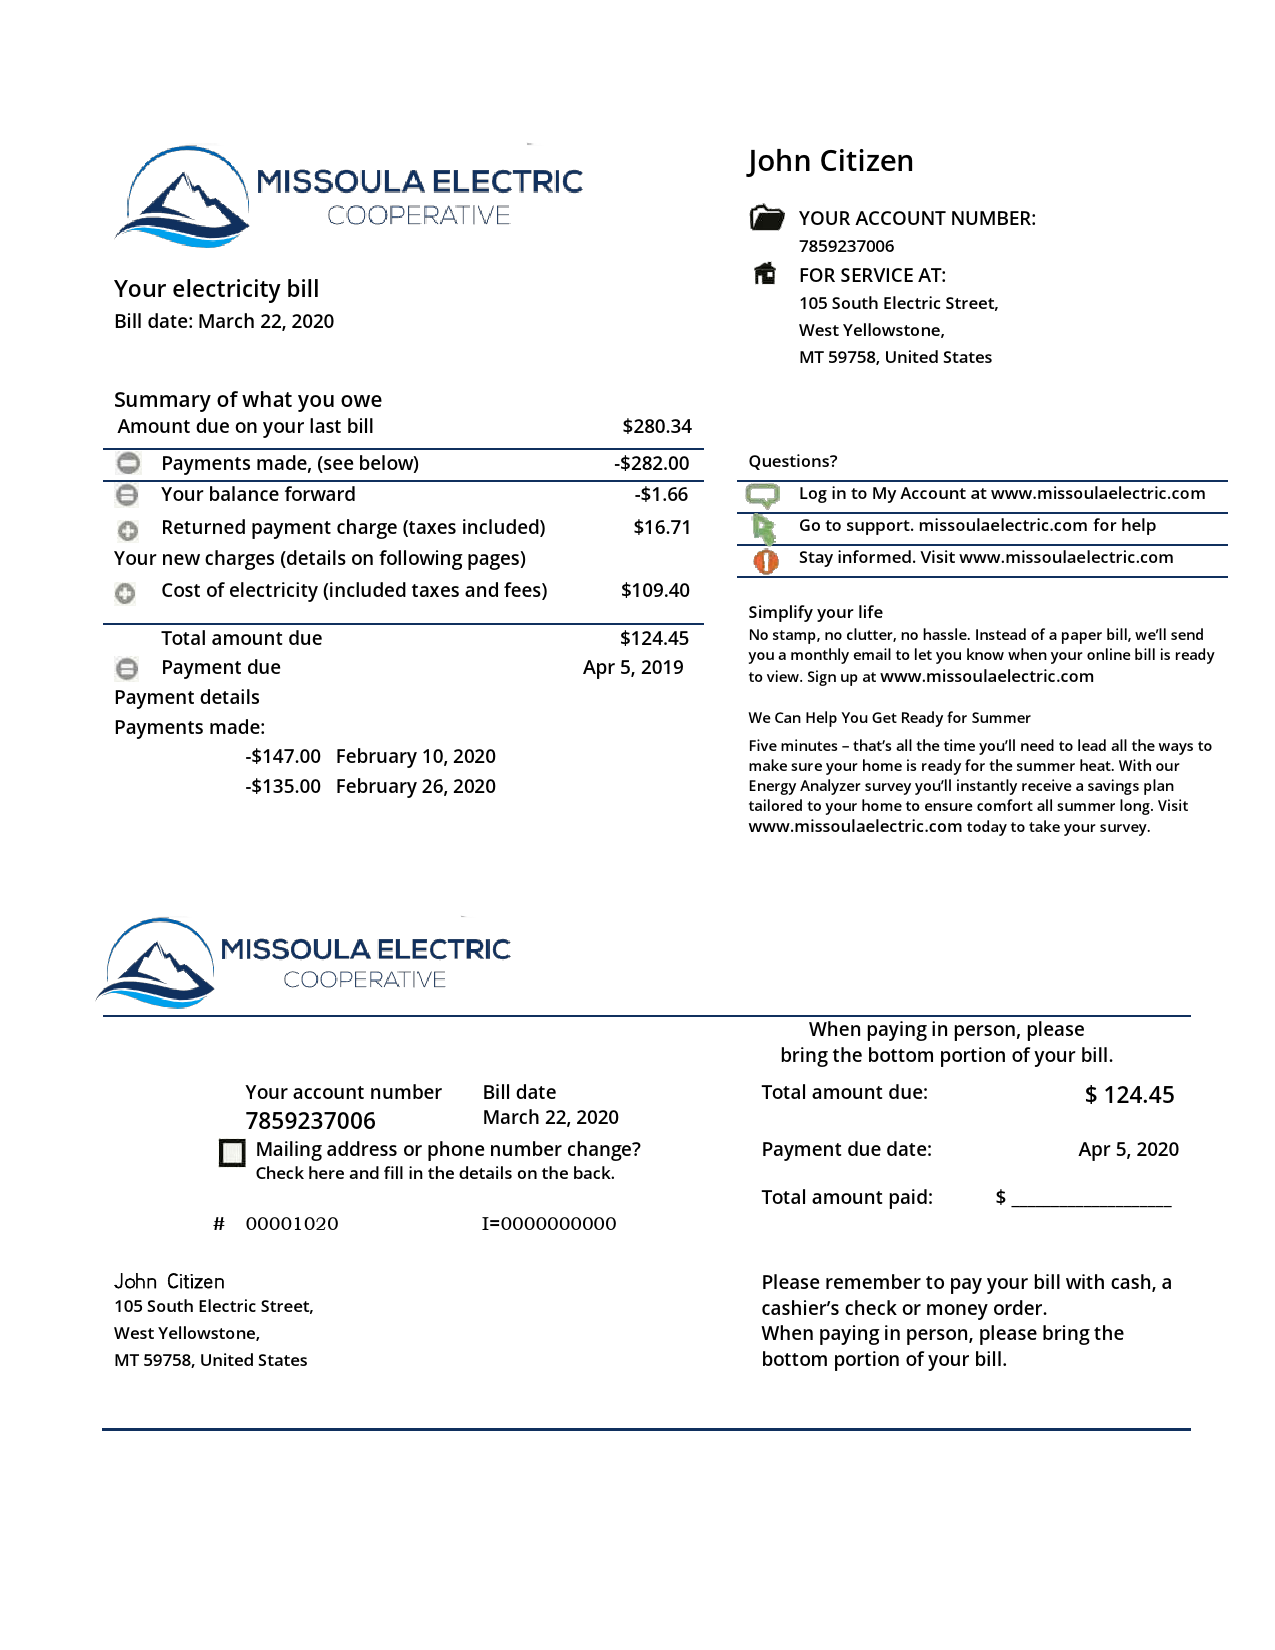 USA Montana Missoula Electric Cooperative electricity utility bill template in Word and PDF format